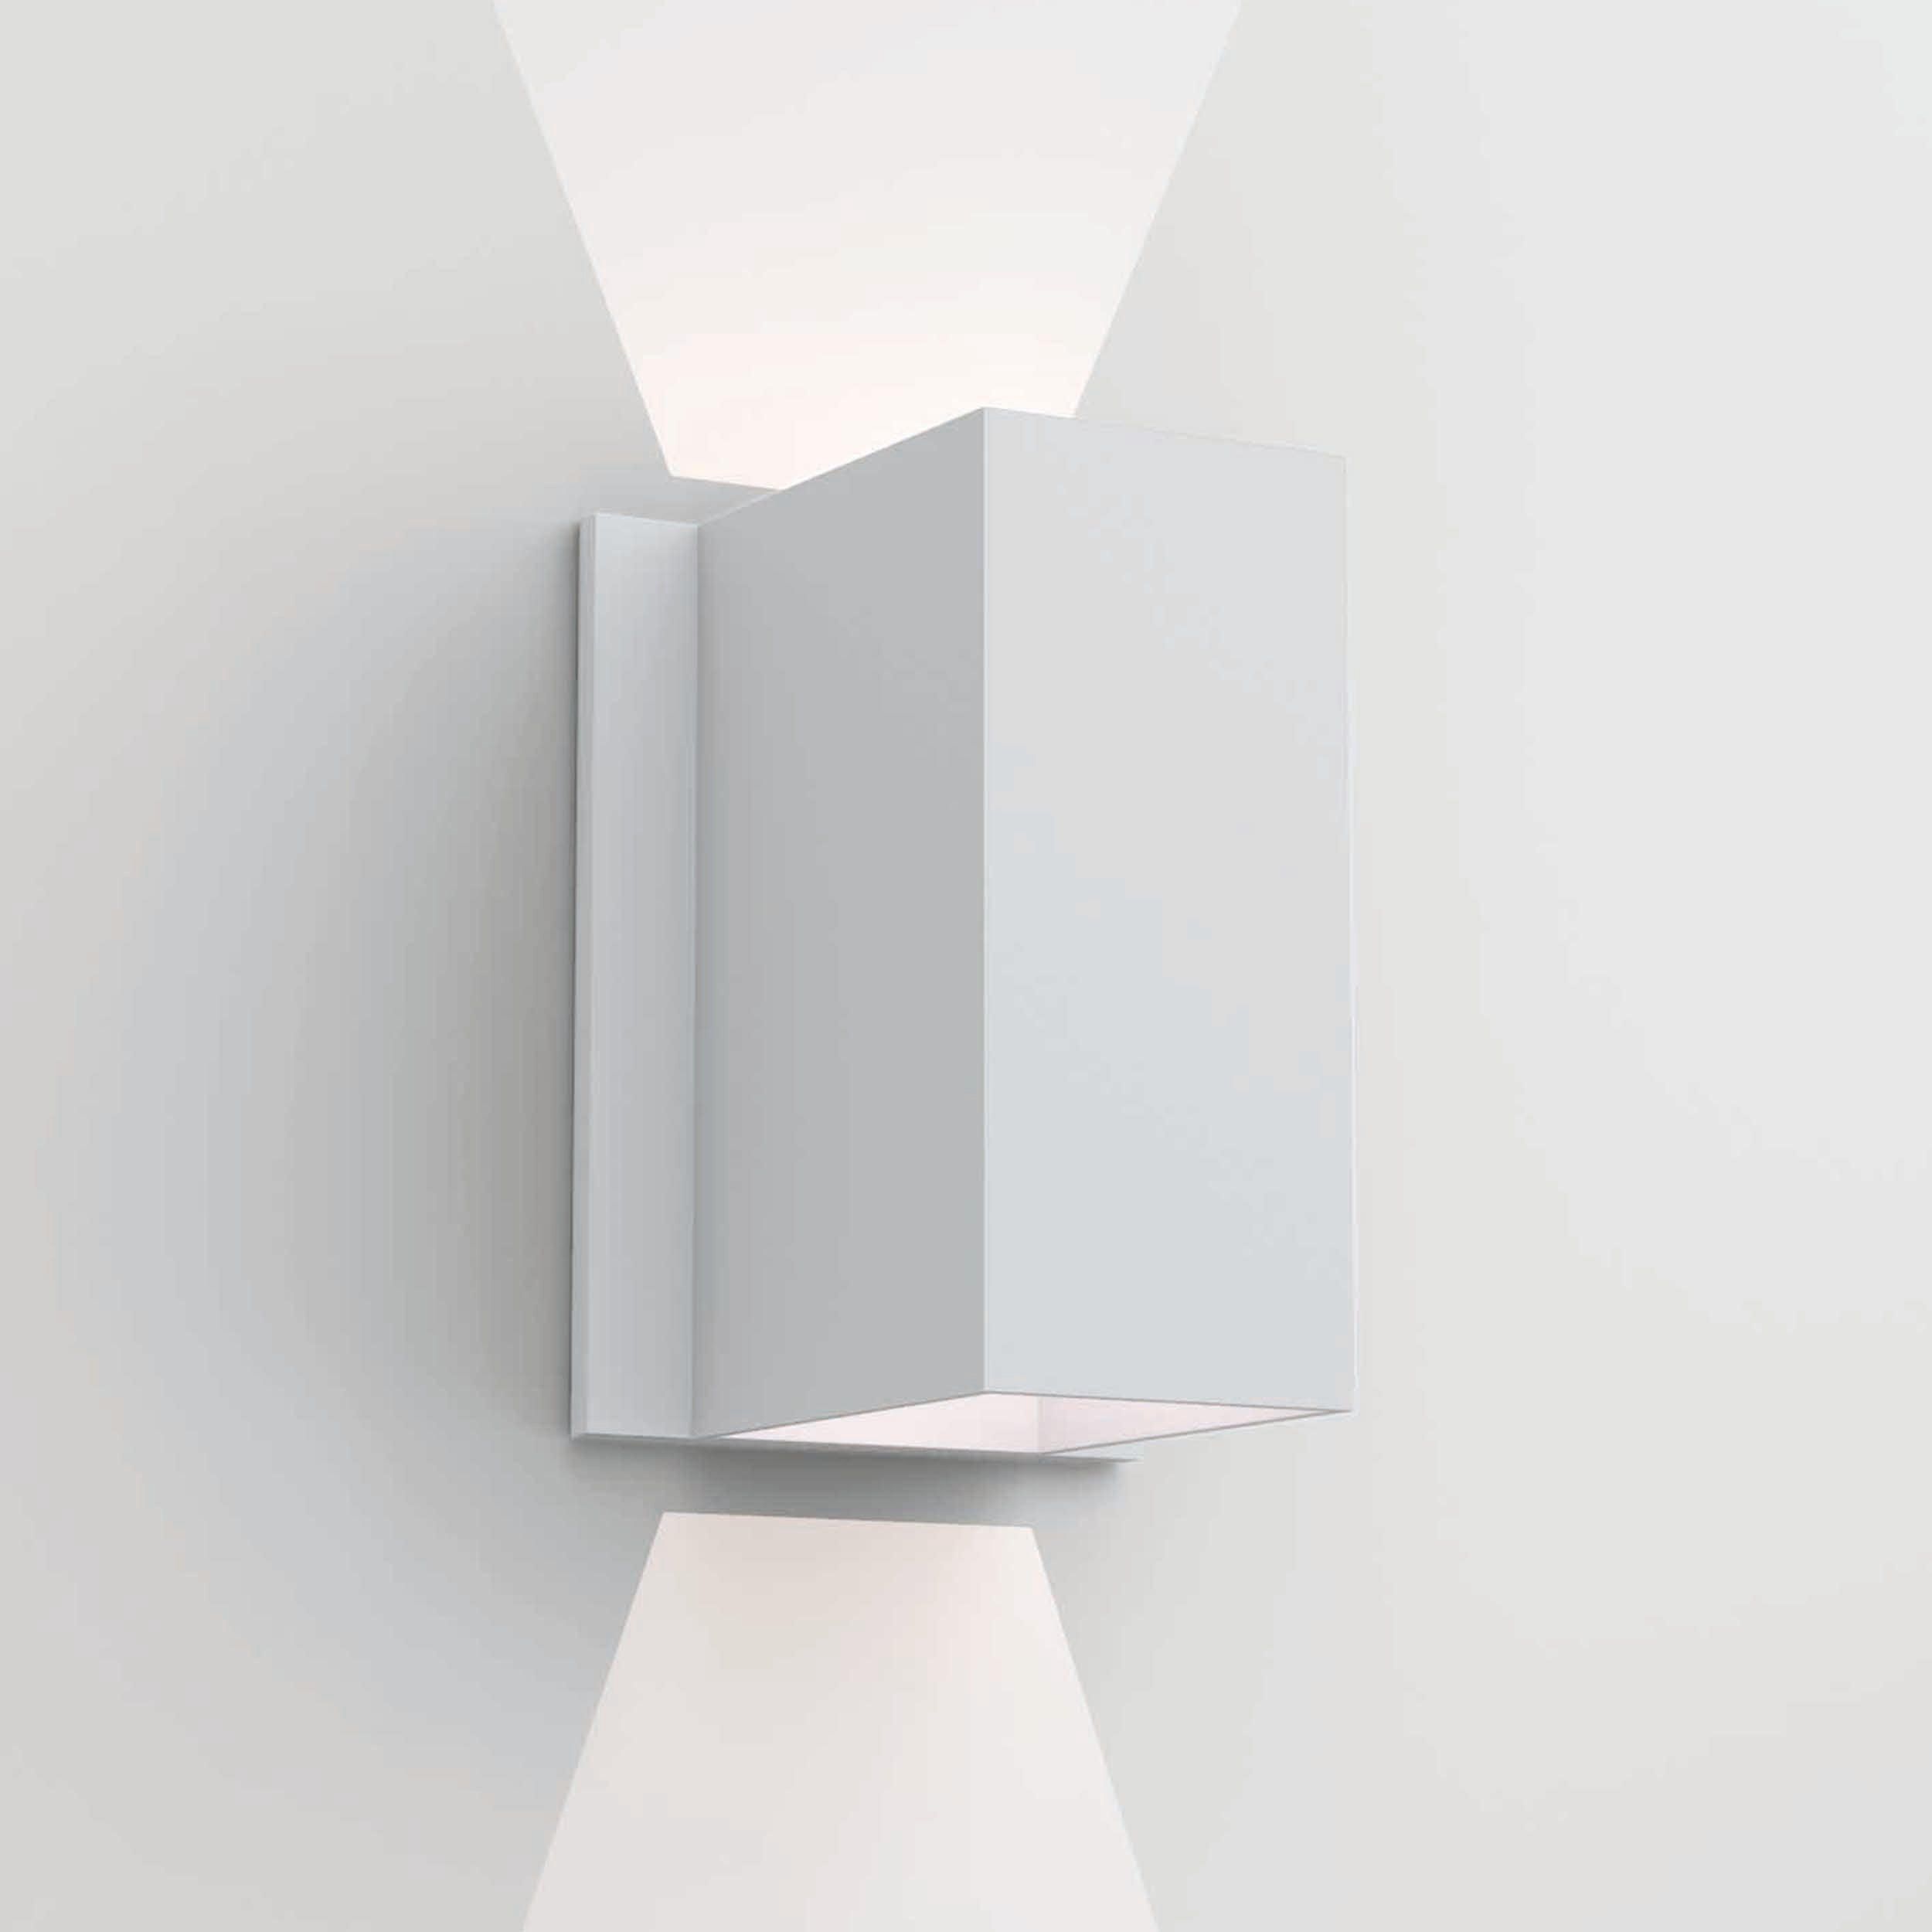 Astro Lighting Oslo Wall Light Fixtures Astro Lighting 4.17x4.33x6.3 Textured White Yes (Integral), High Power LED